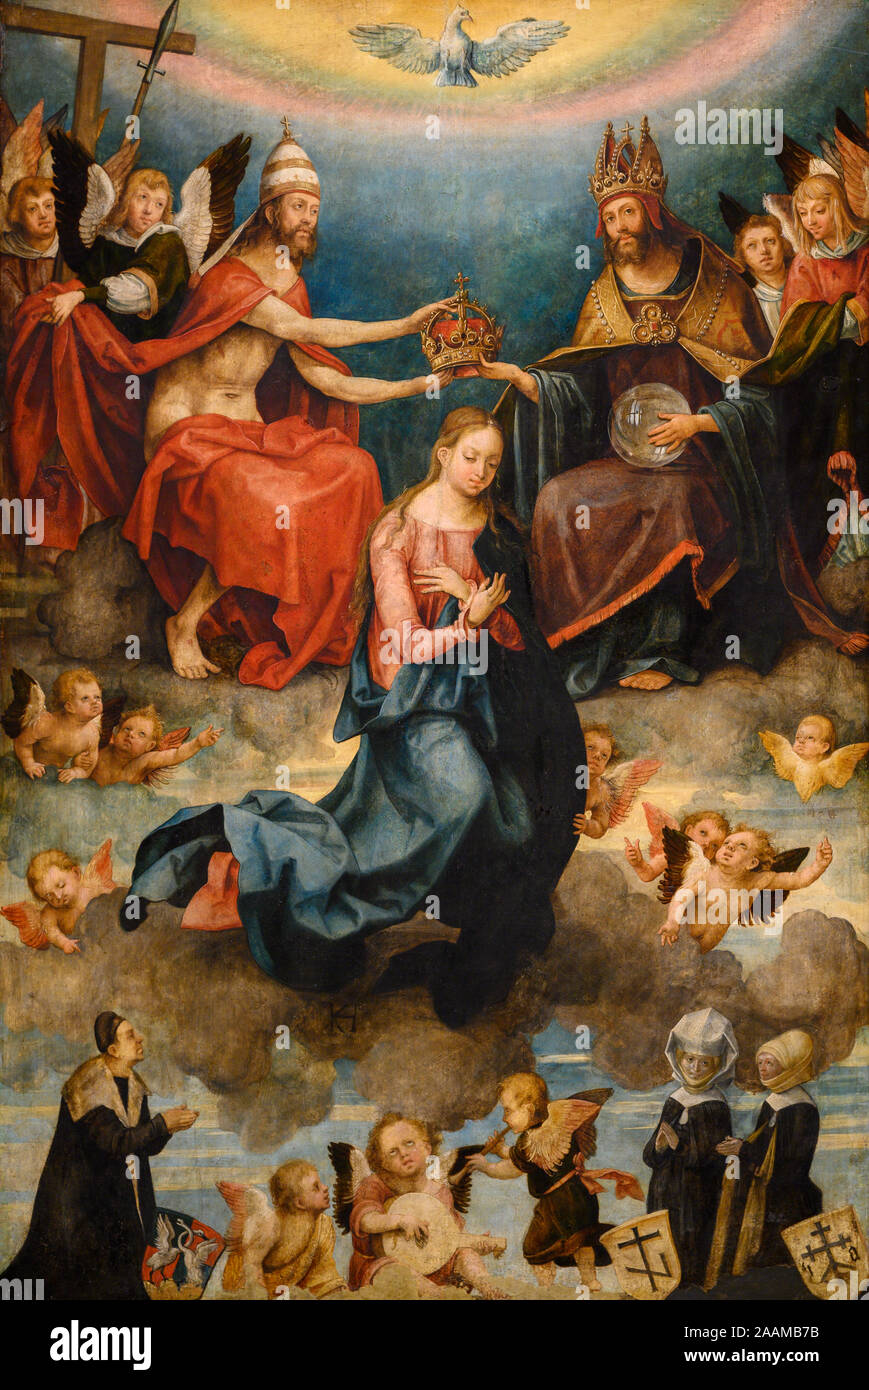 'The Coronation of the Virgin Mary' (1514) by Hans Suess, known as Hans (Süß) von Kulmbach (1480-1522). Kunsthistorisches Museum in Vienna. Stock Photo